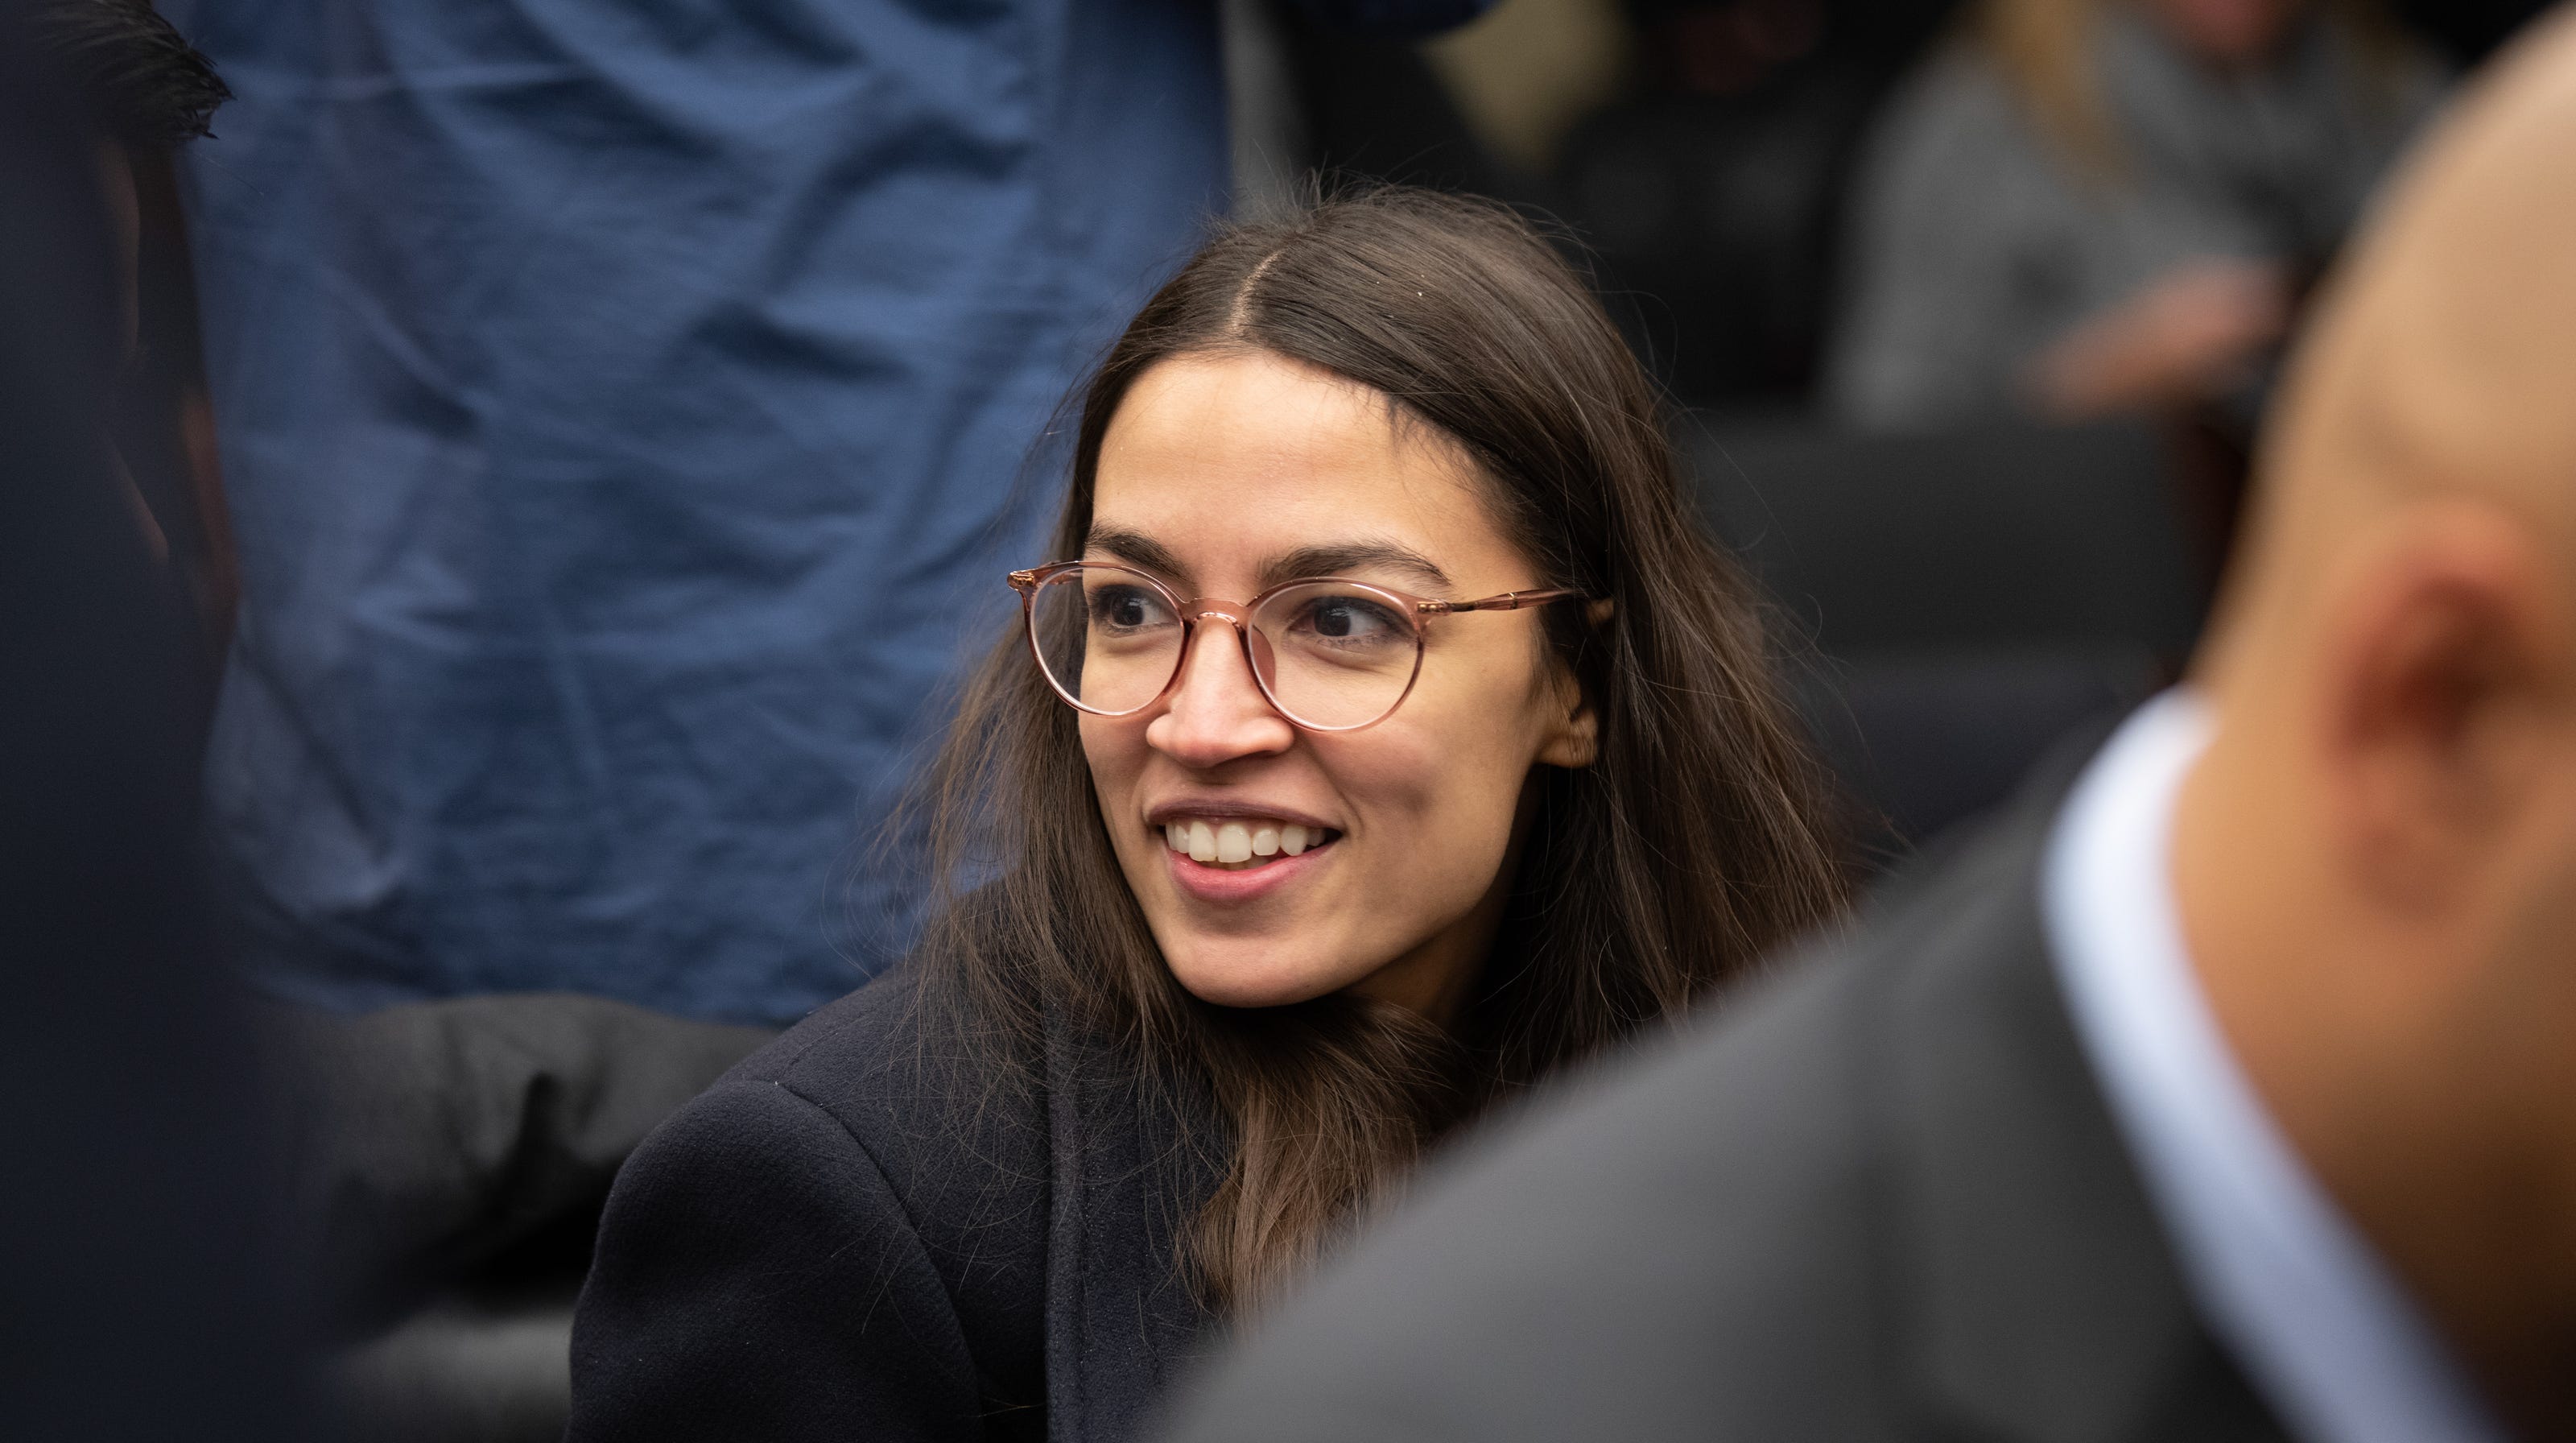 Old Alexandria Ocasio-Cortez dance video goes viral as supporters mock sham...